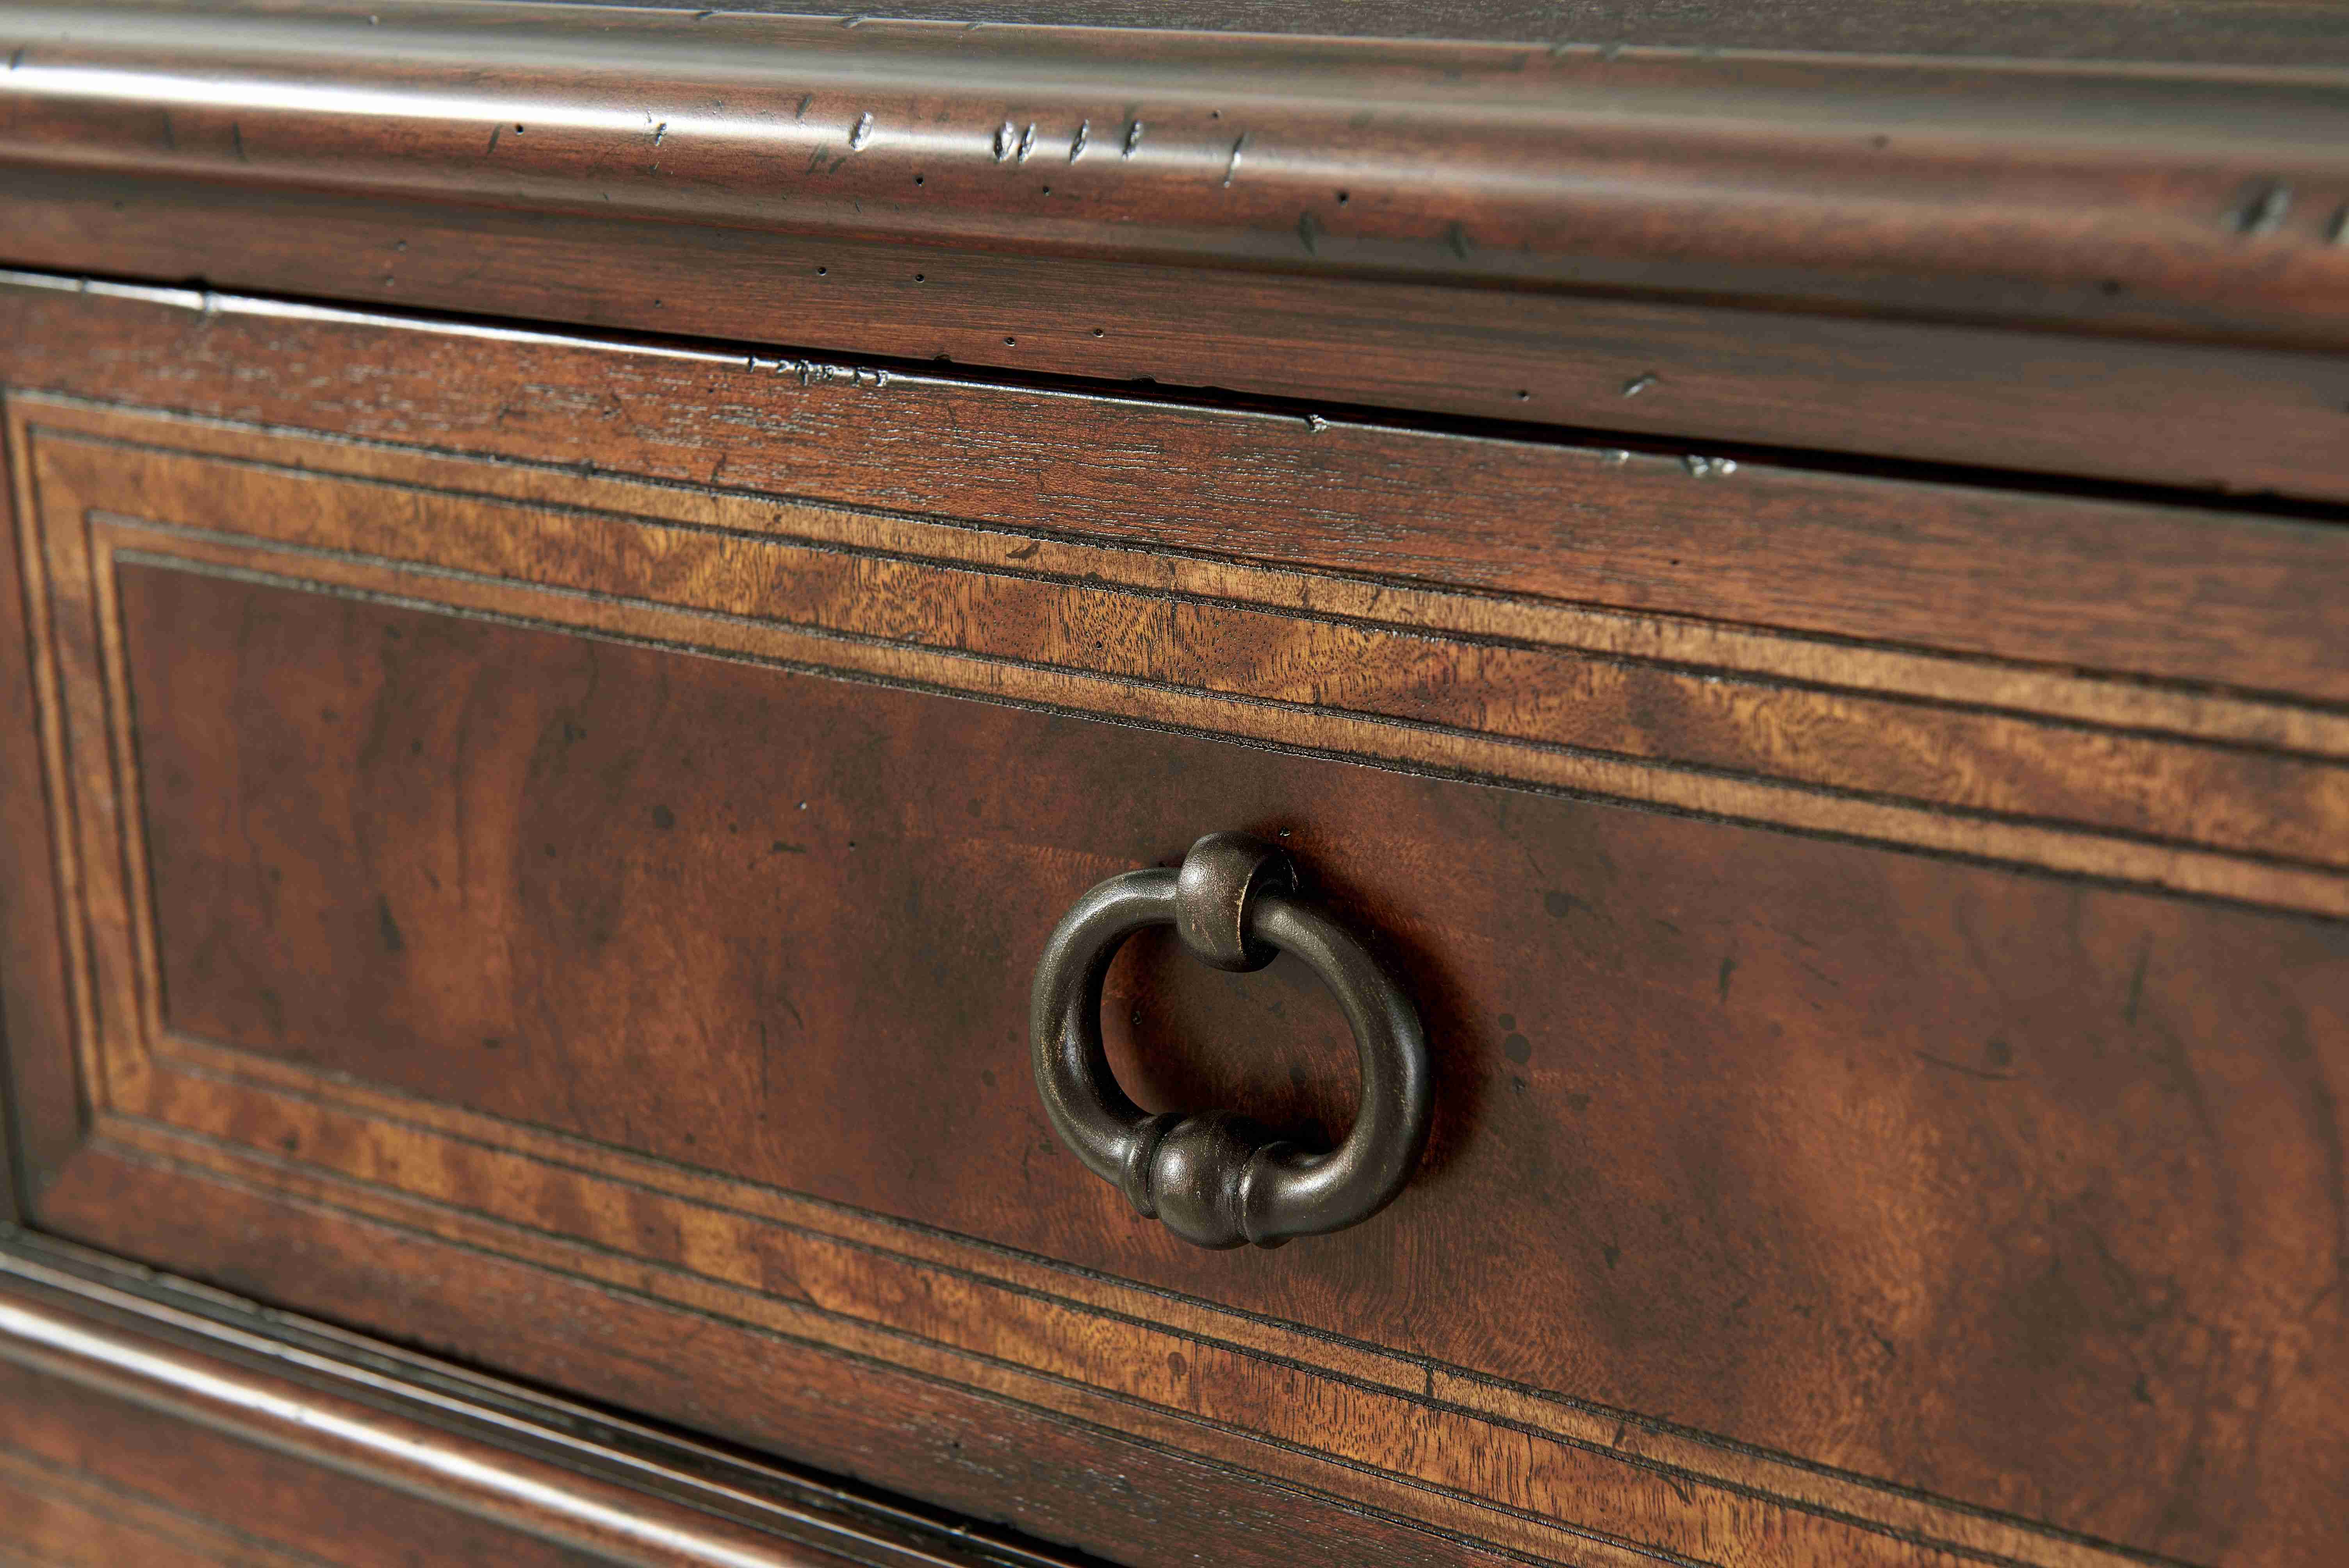 BROOKSBY CHEST